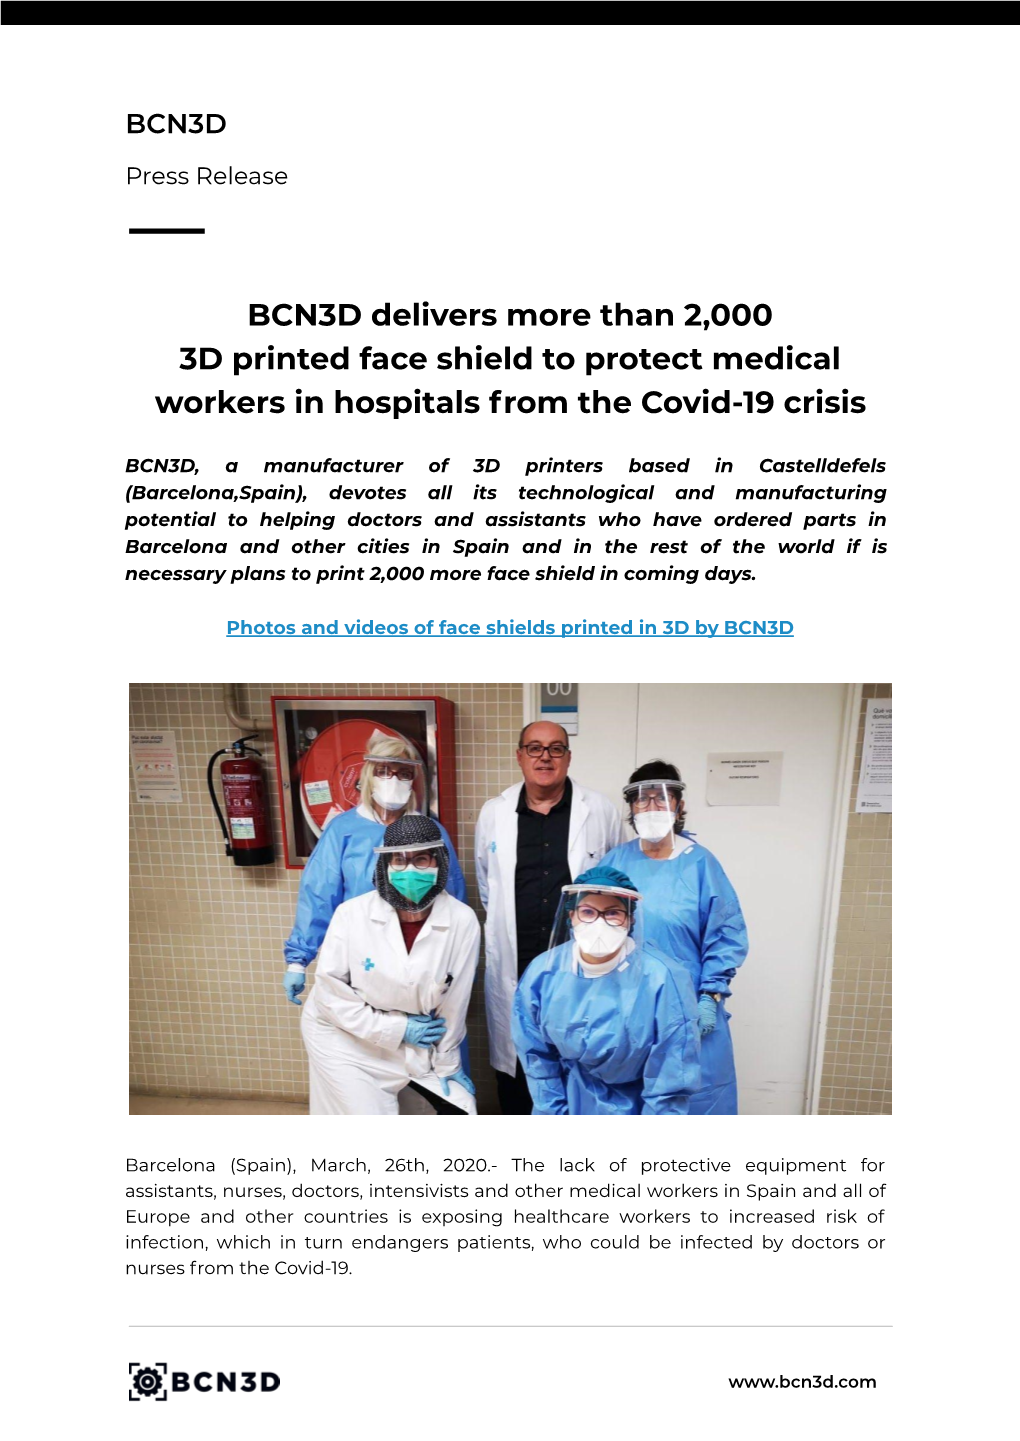 BCN3D Delivers More Than 2,000 3D Printed Face Shield to Protect Medical Workers in Hospitals from the Covid-19 Crisis